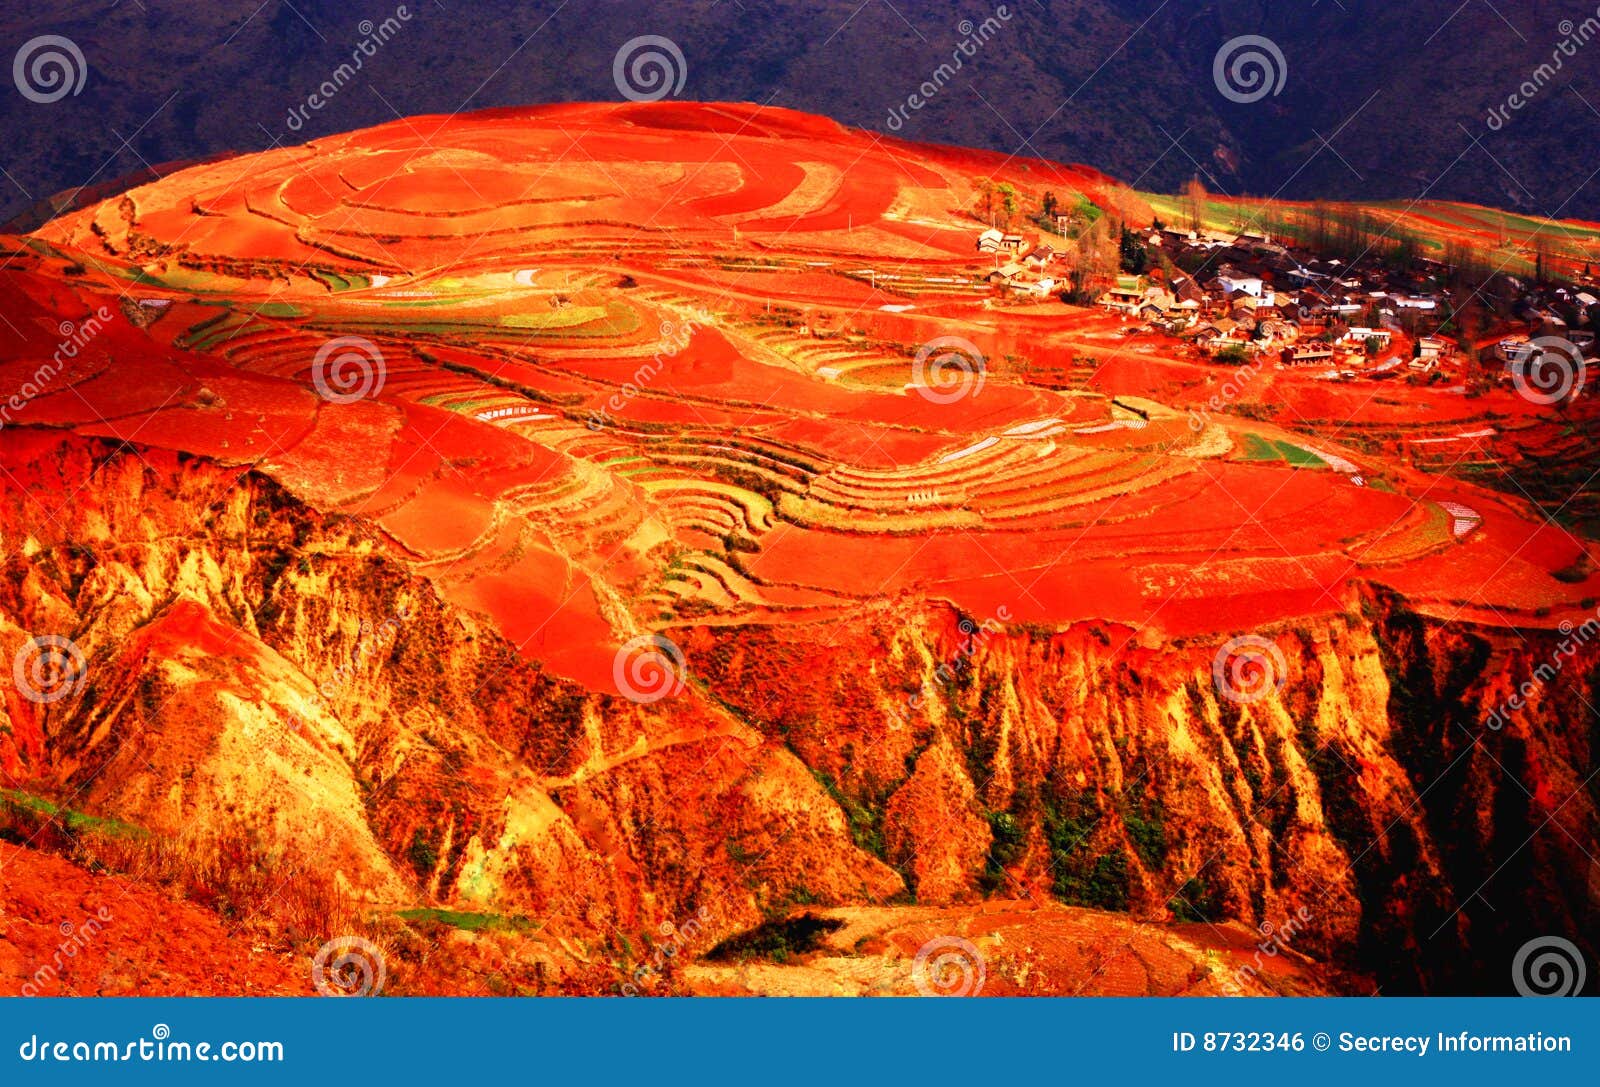 yunnan province red plateau